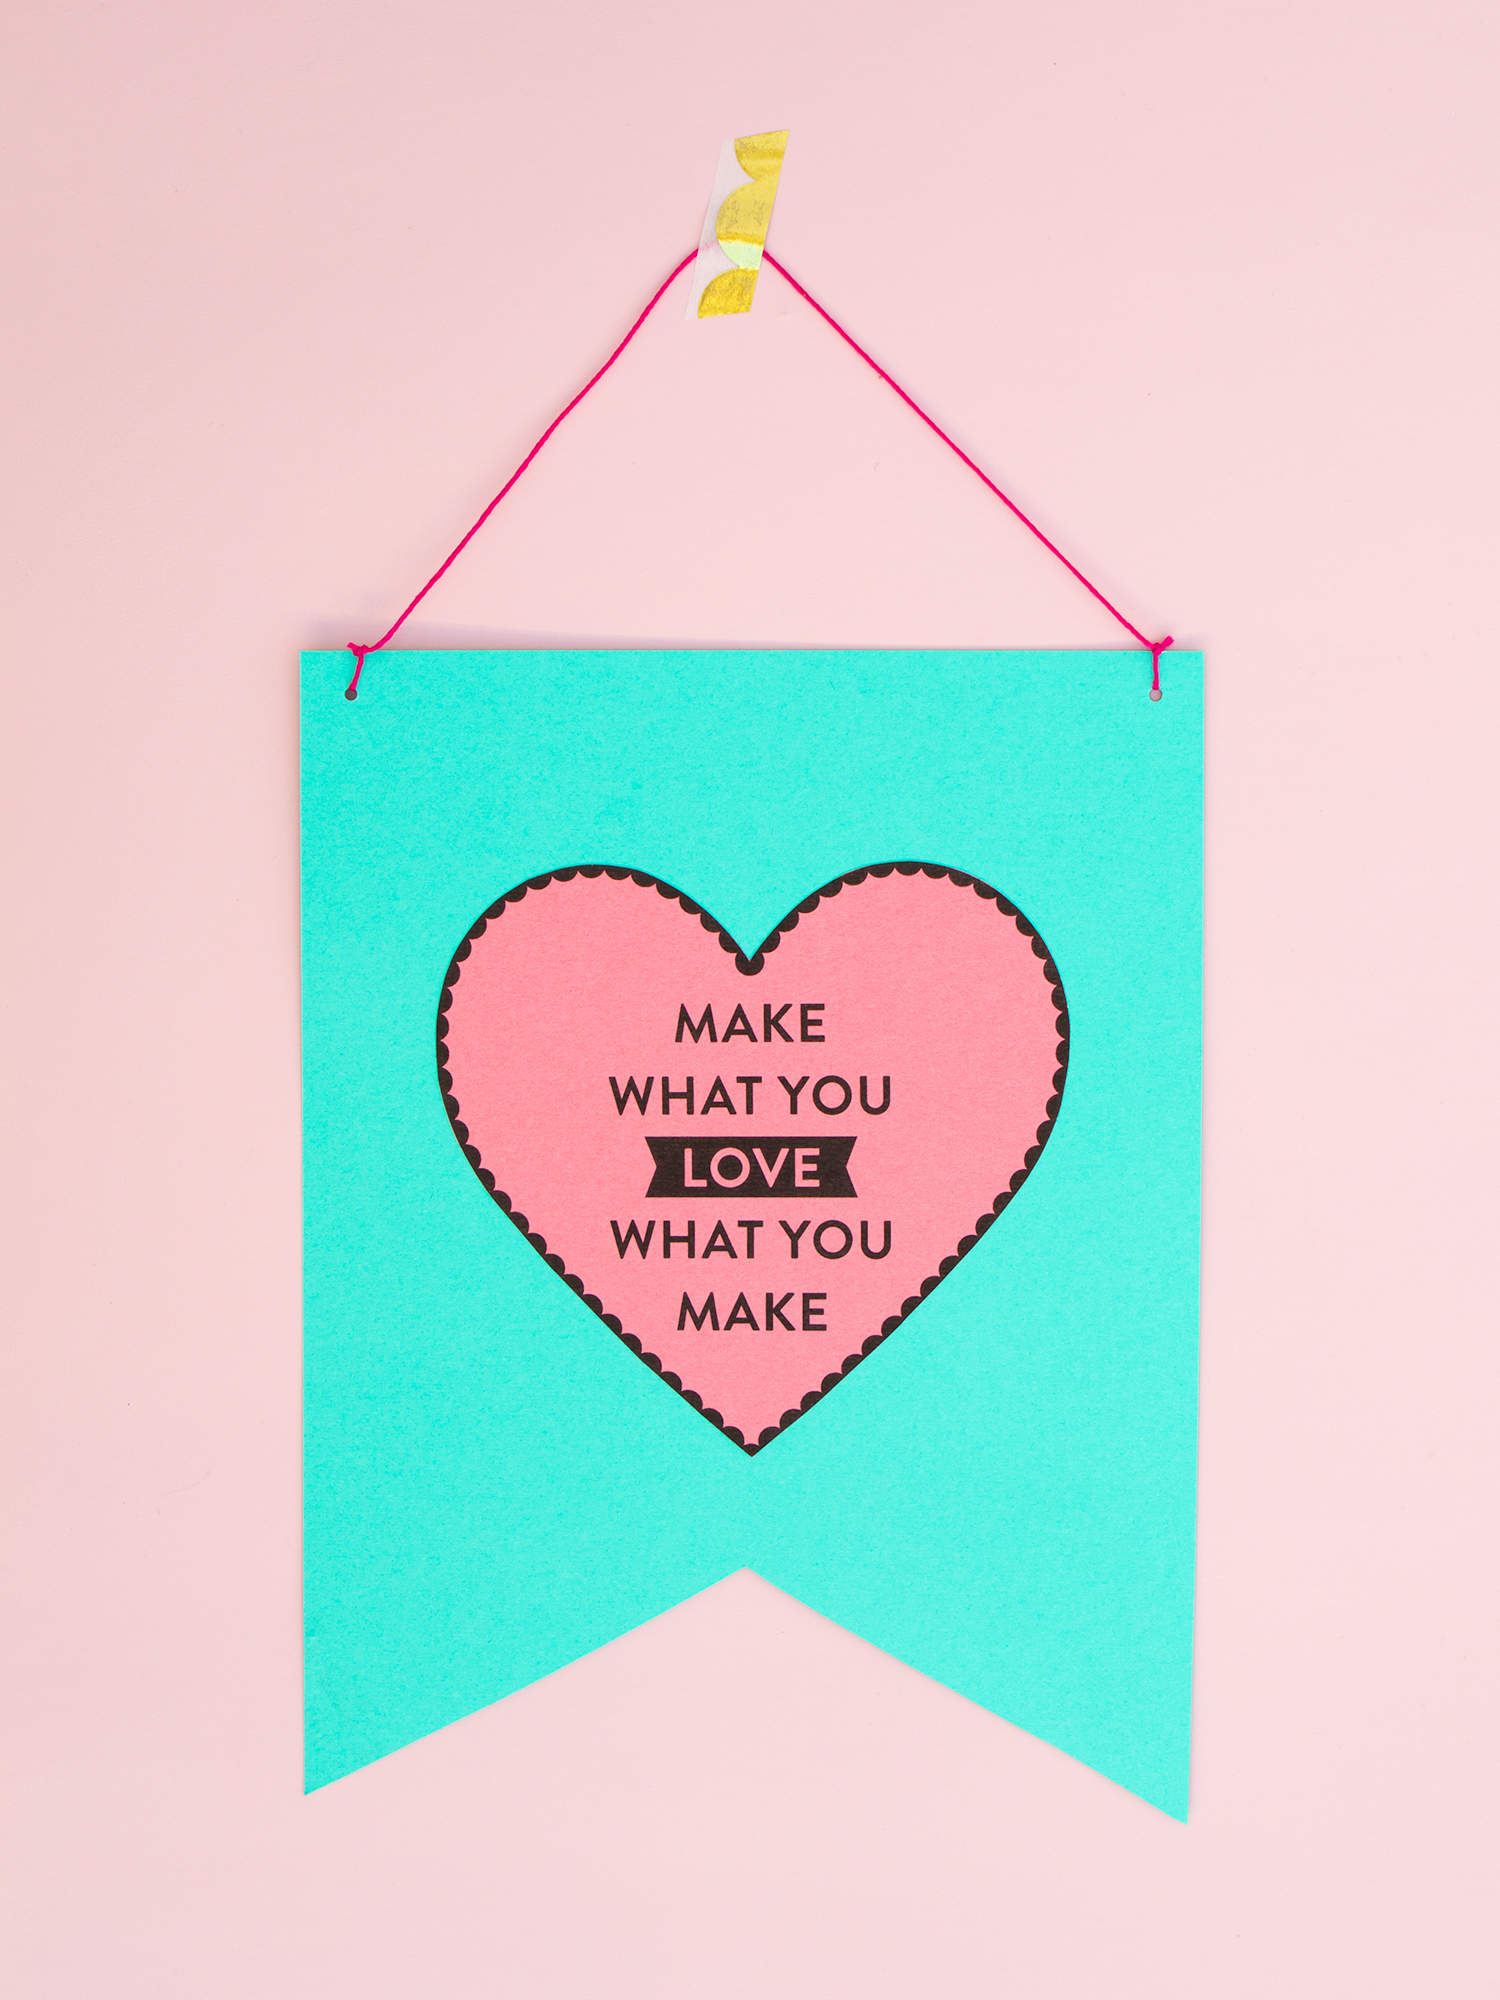 http://sarahhearts.com/wp-content/uploads/2016/02/valentine-banners-5.jpg